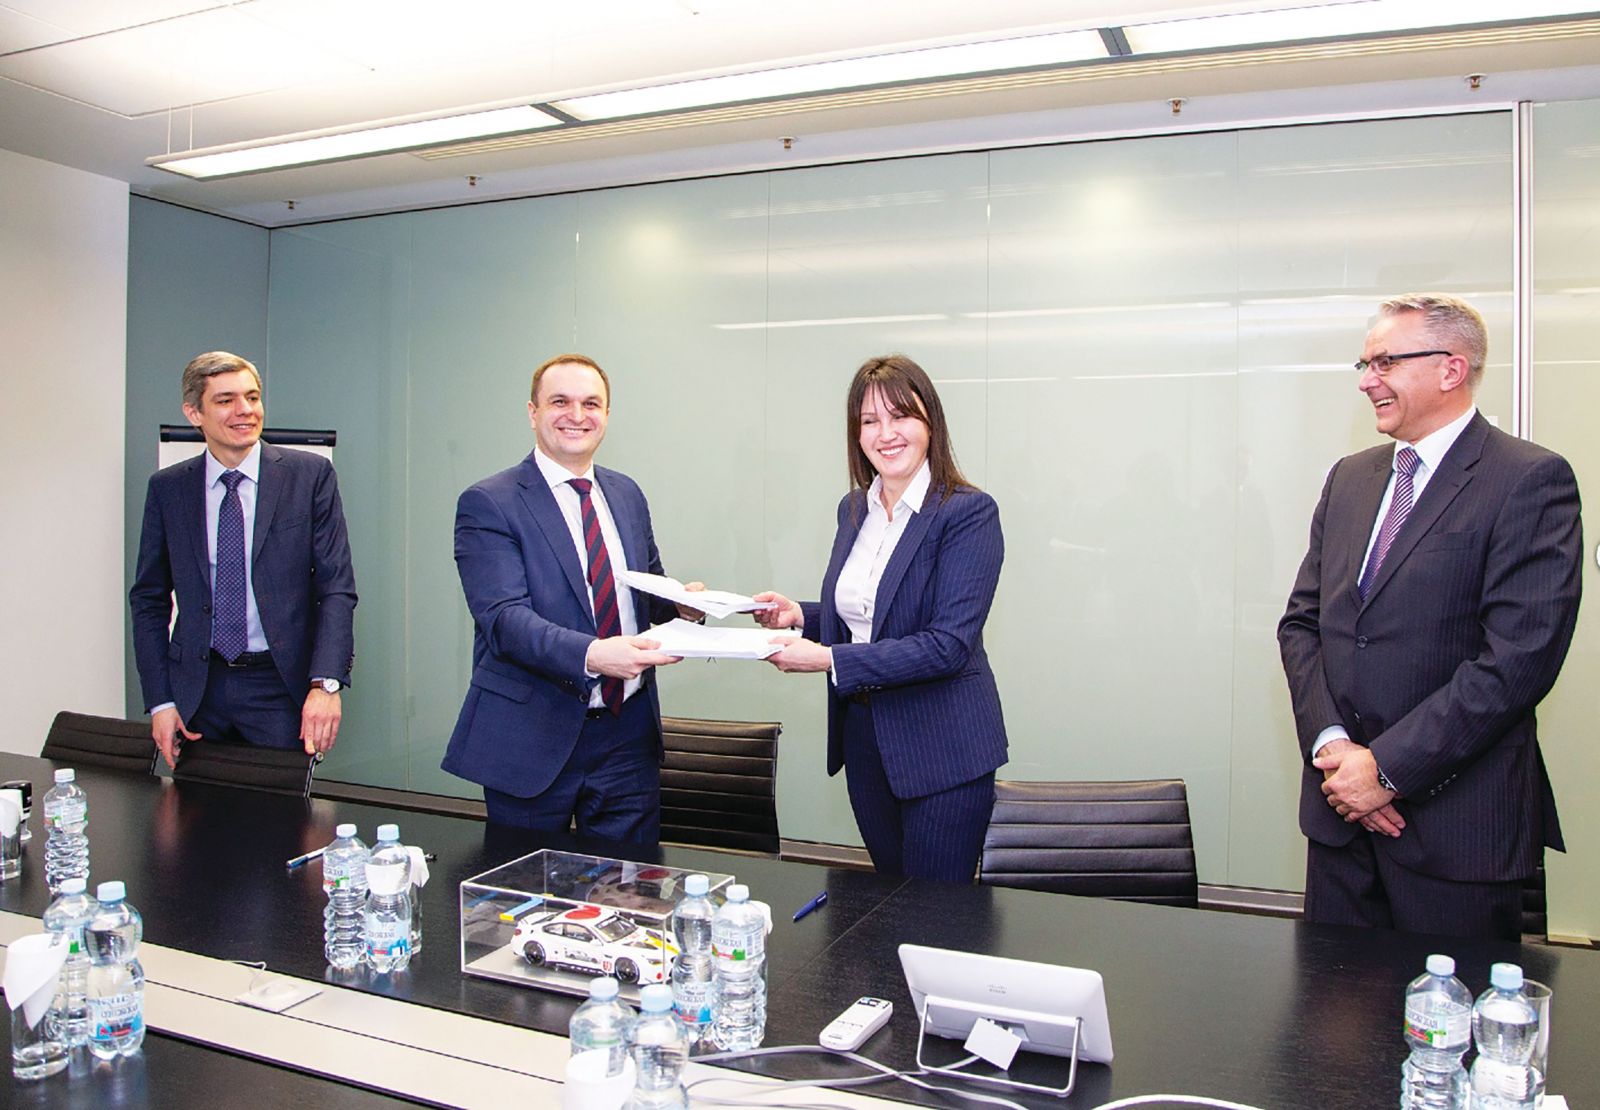 BMW Russia CEO Irina Shramko meets with AVTOTOR officials to finalize a $305 million investment in a production line for the country's most popular models. (Photo/Provided)